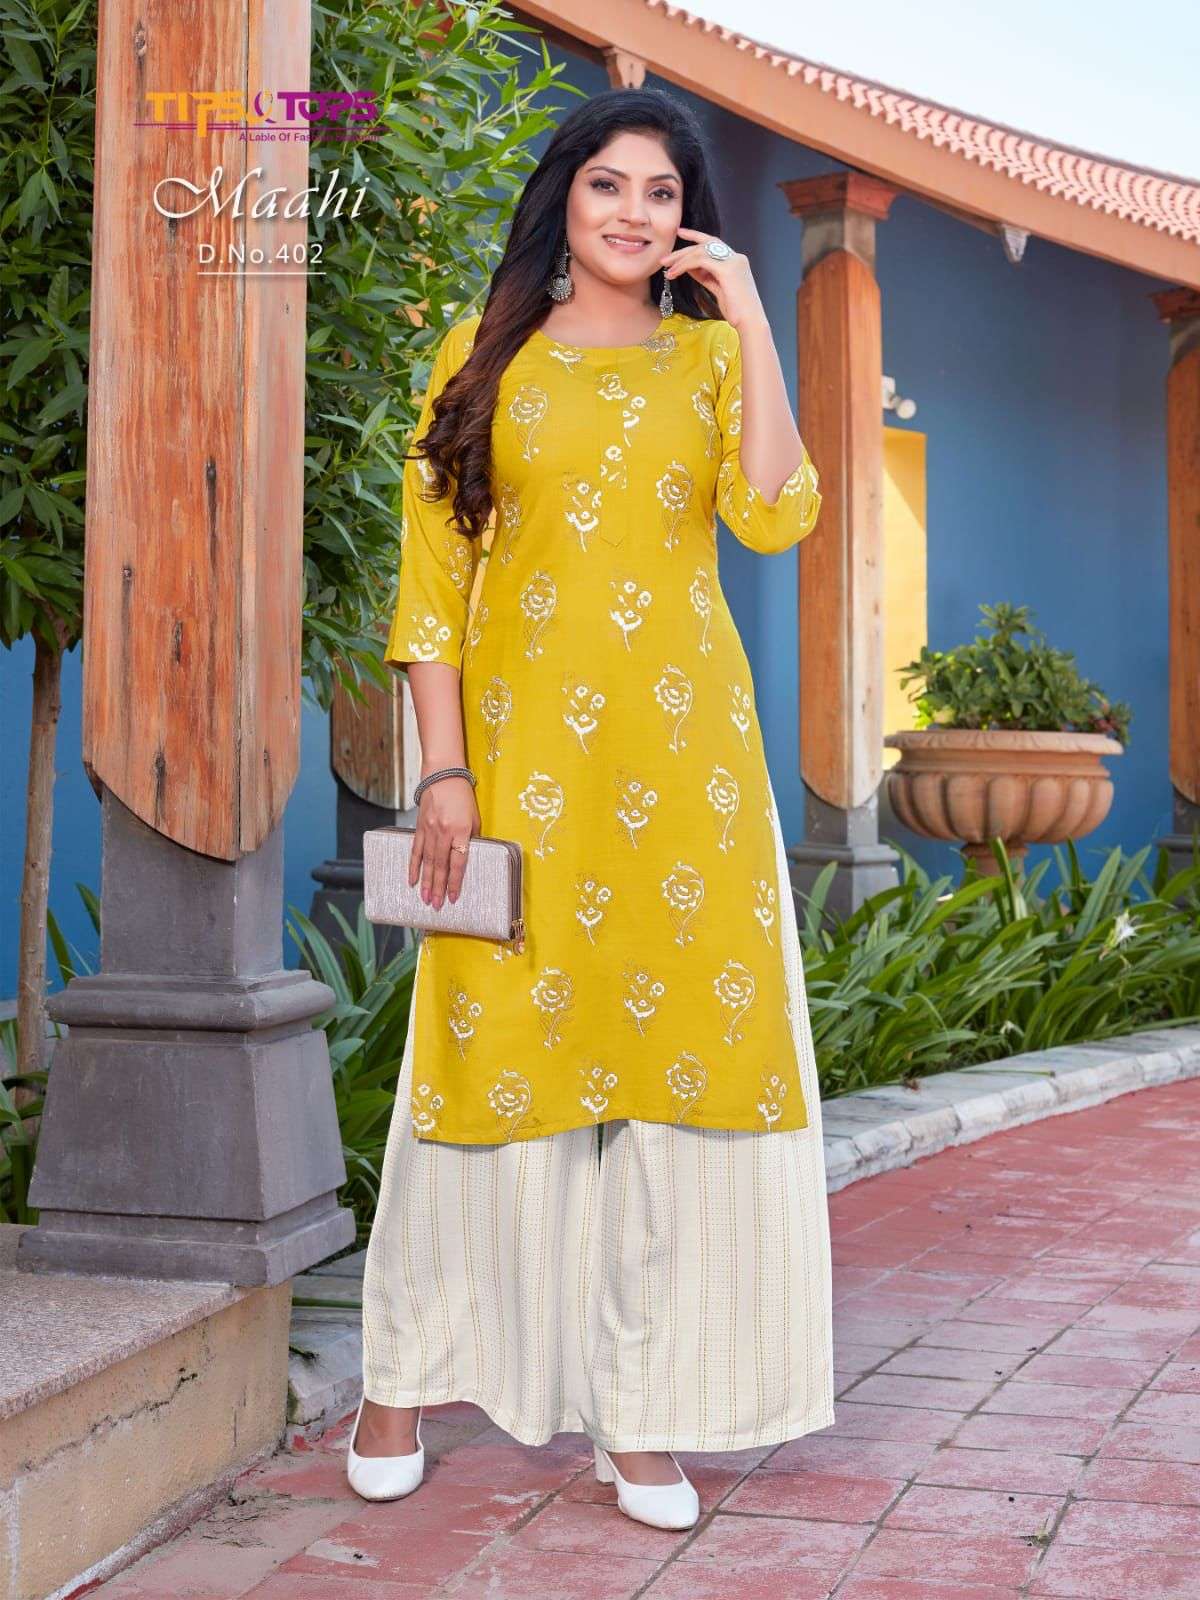 TIPS & TOPS PRESENT MAAHI VOL 4 READY TO WEAR RAYON PRINTED KURTI WITH PLAZZO IN WHOLESALE PRICE IN SURAT - SAI DRESSES